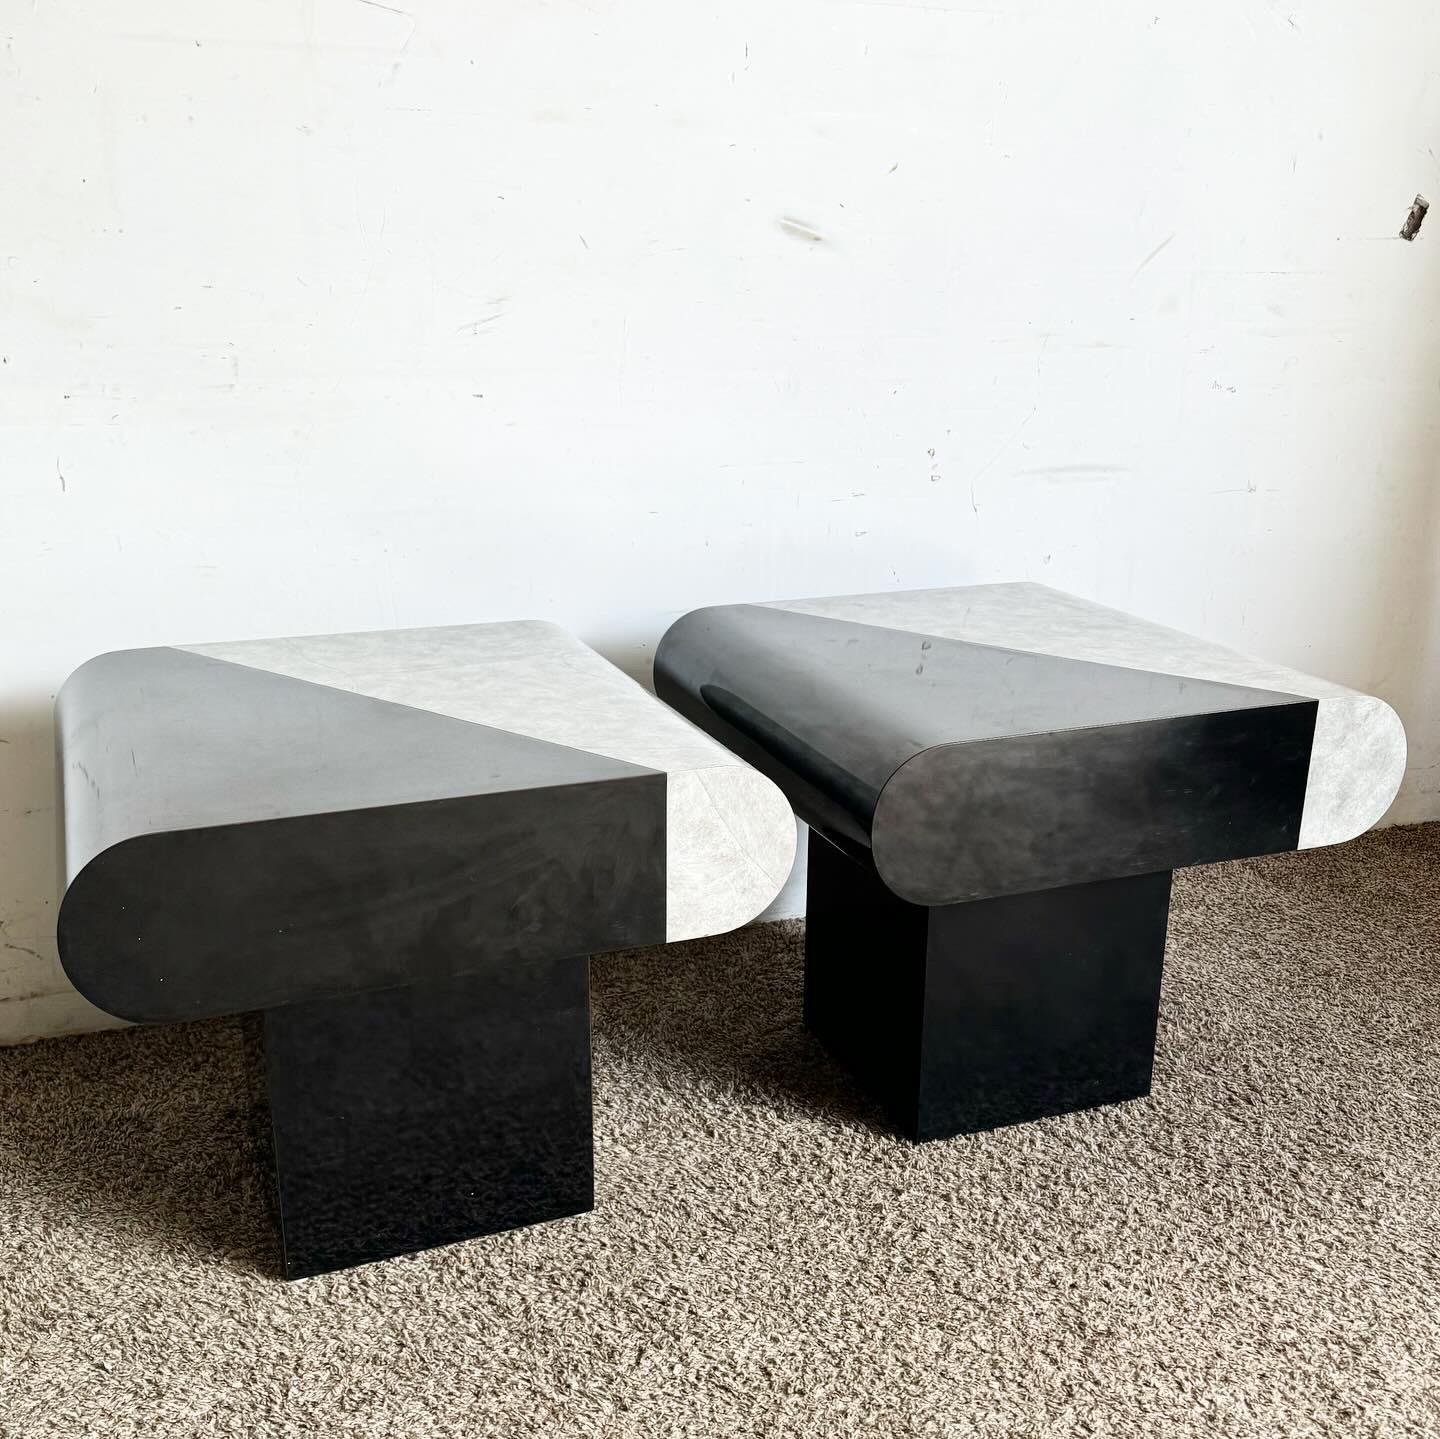 Postmodern Black Gloss and Faux Stone Laminate Bullnose Side Tables - a Pair For Sale 3